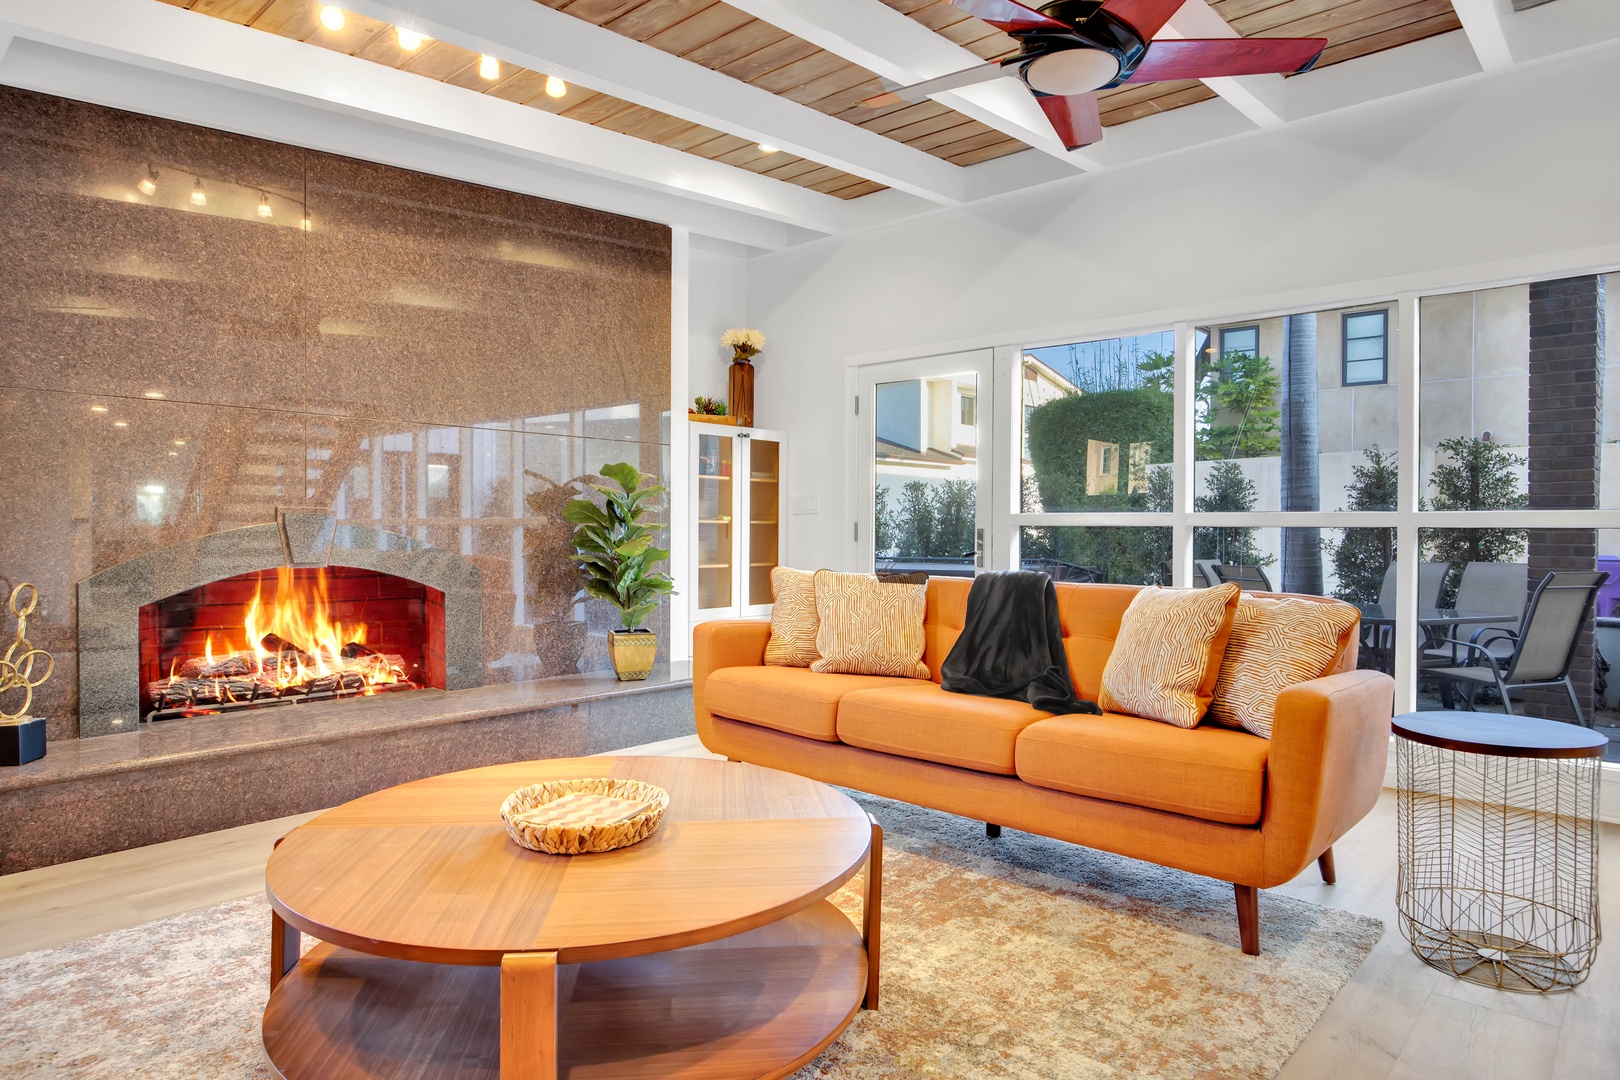 Bright open lower living space with lush seating and fireplace